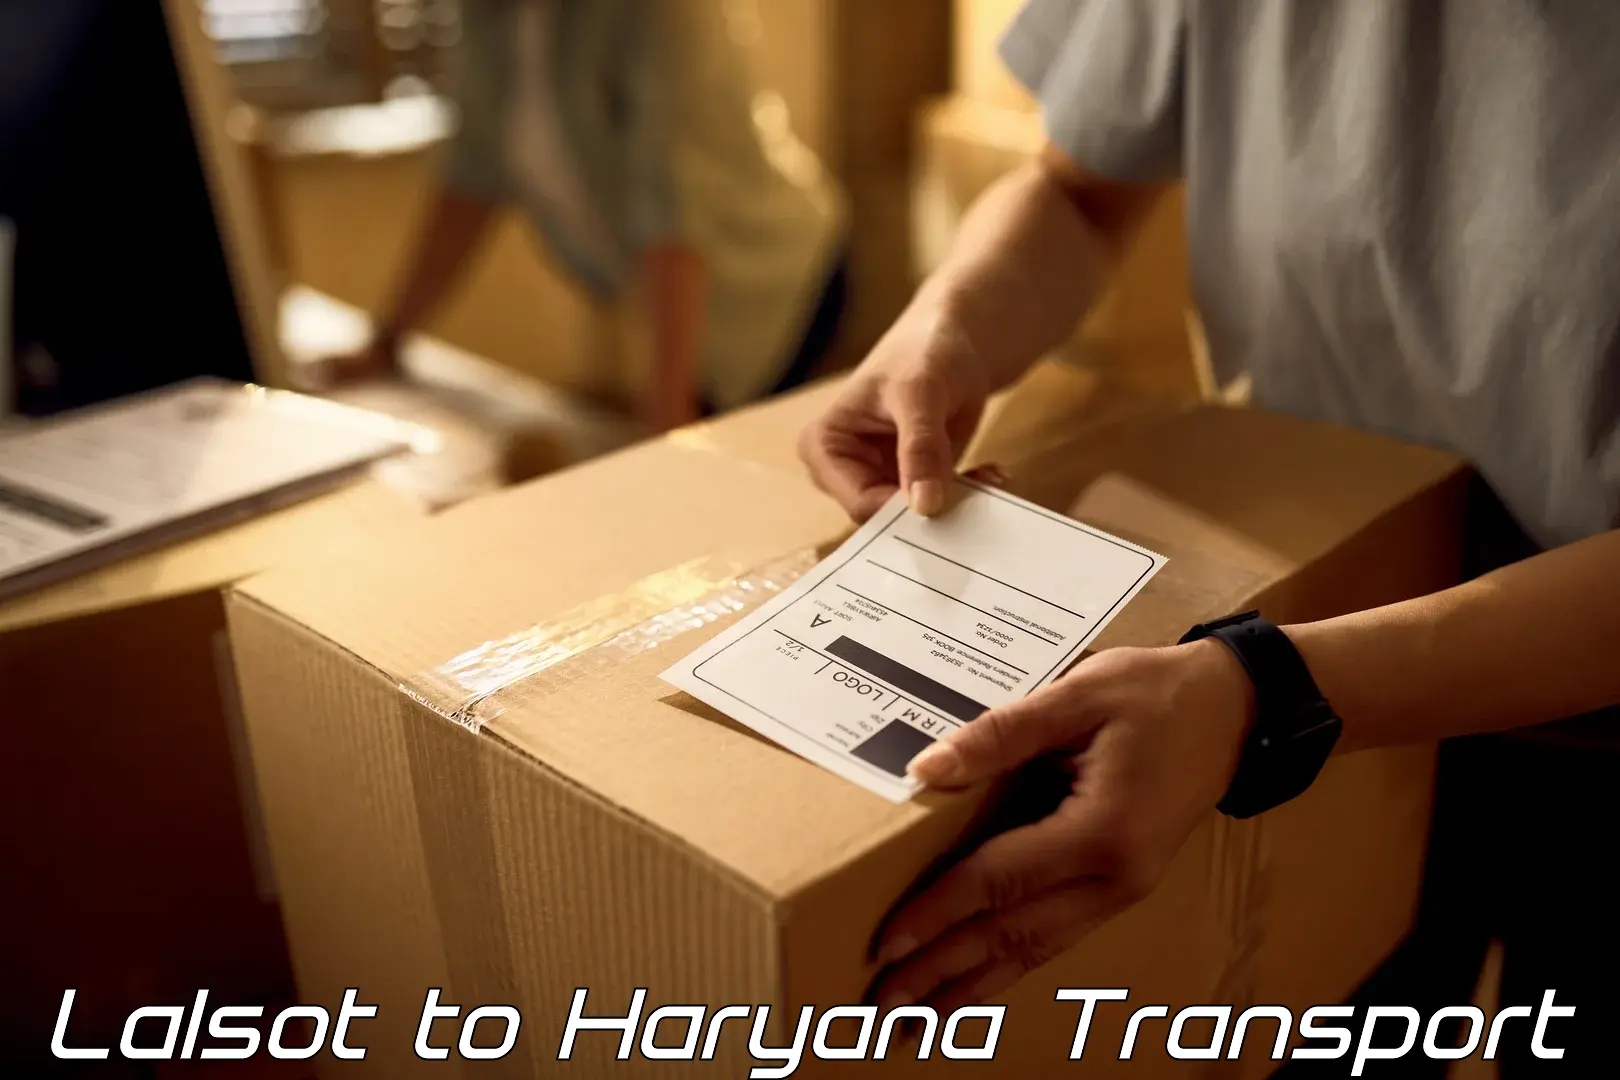 Container transportation services Lalsot to Gurgaon